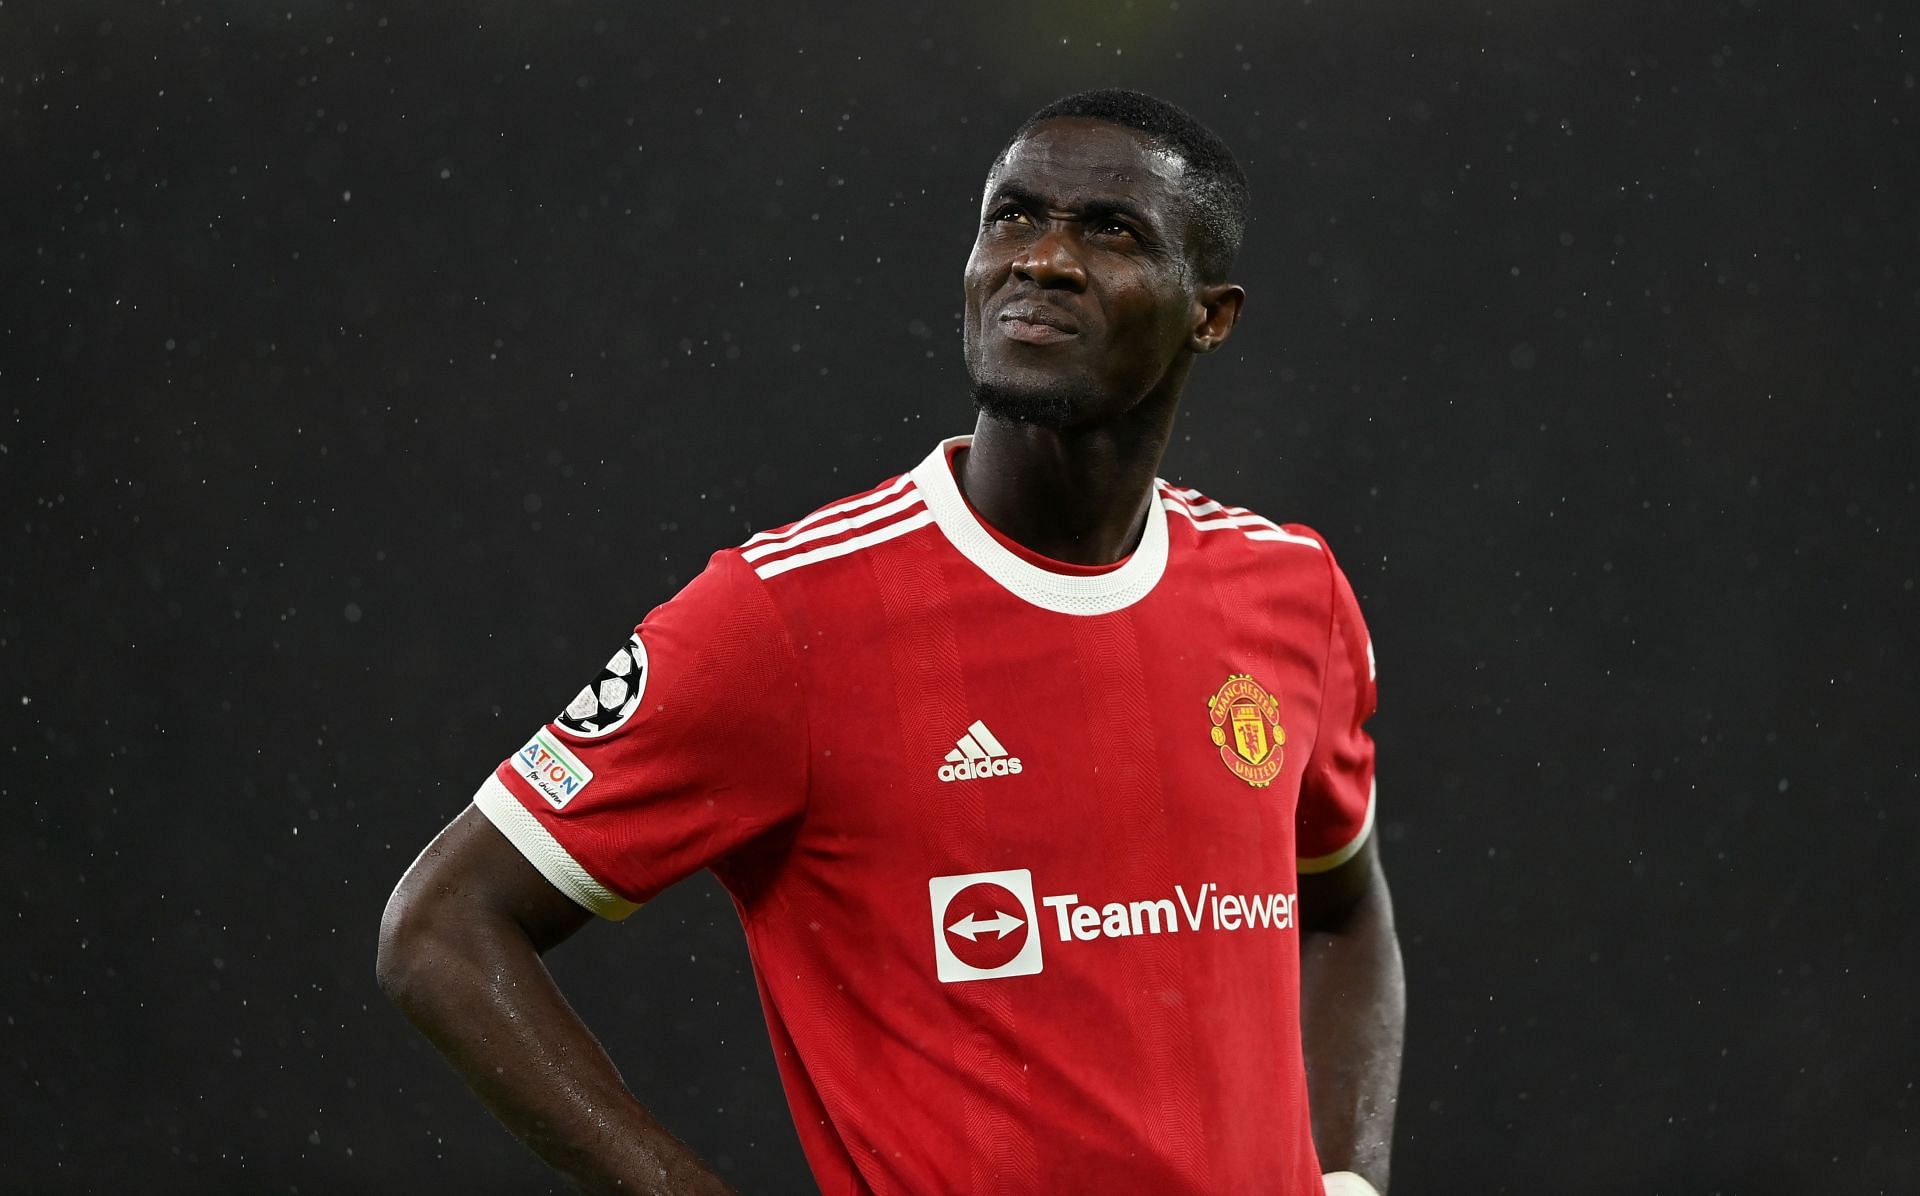 Eric Bailly has endured an injury-prone stint at Manchester United.